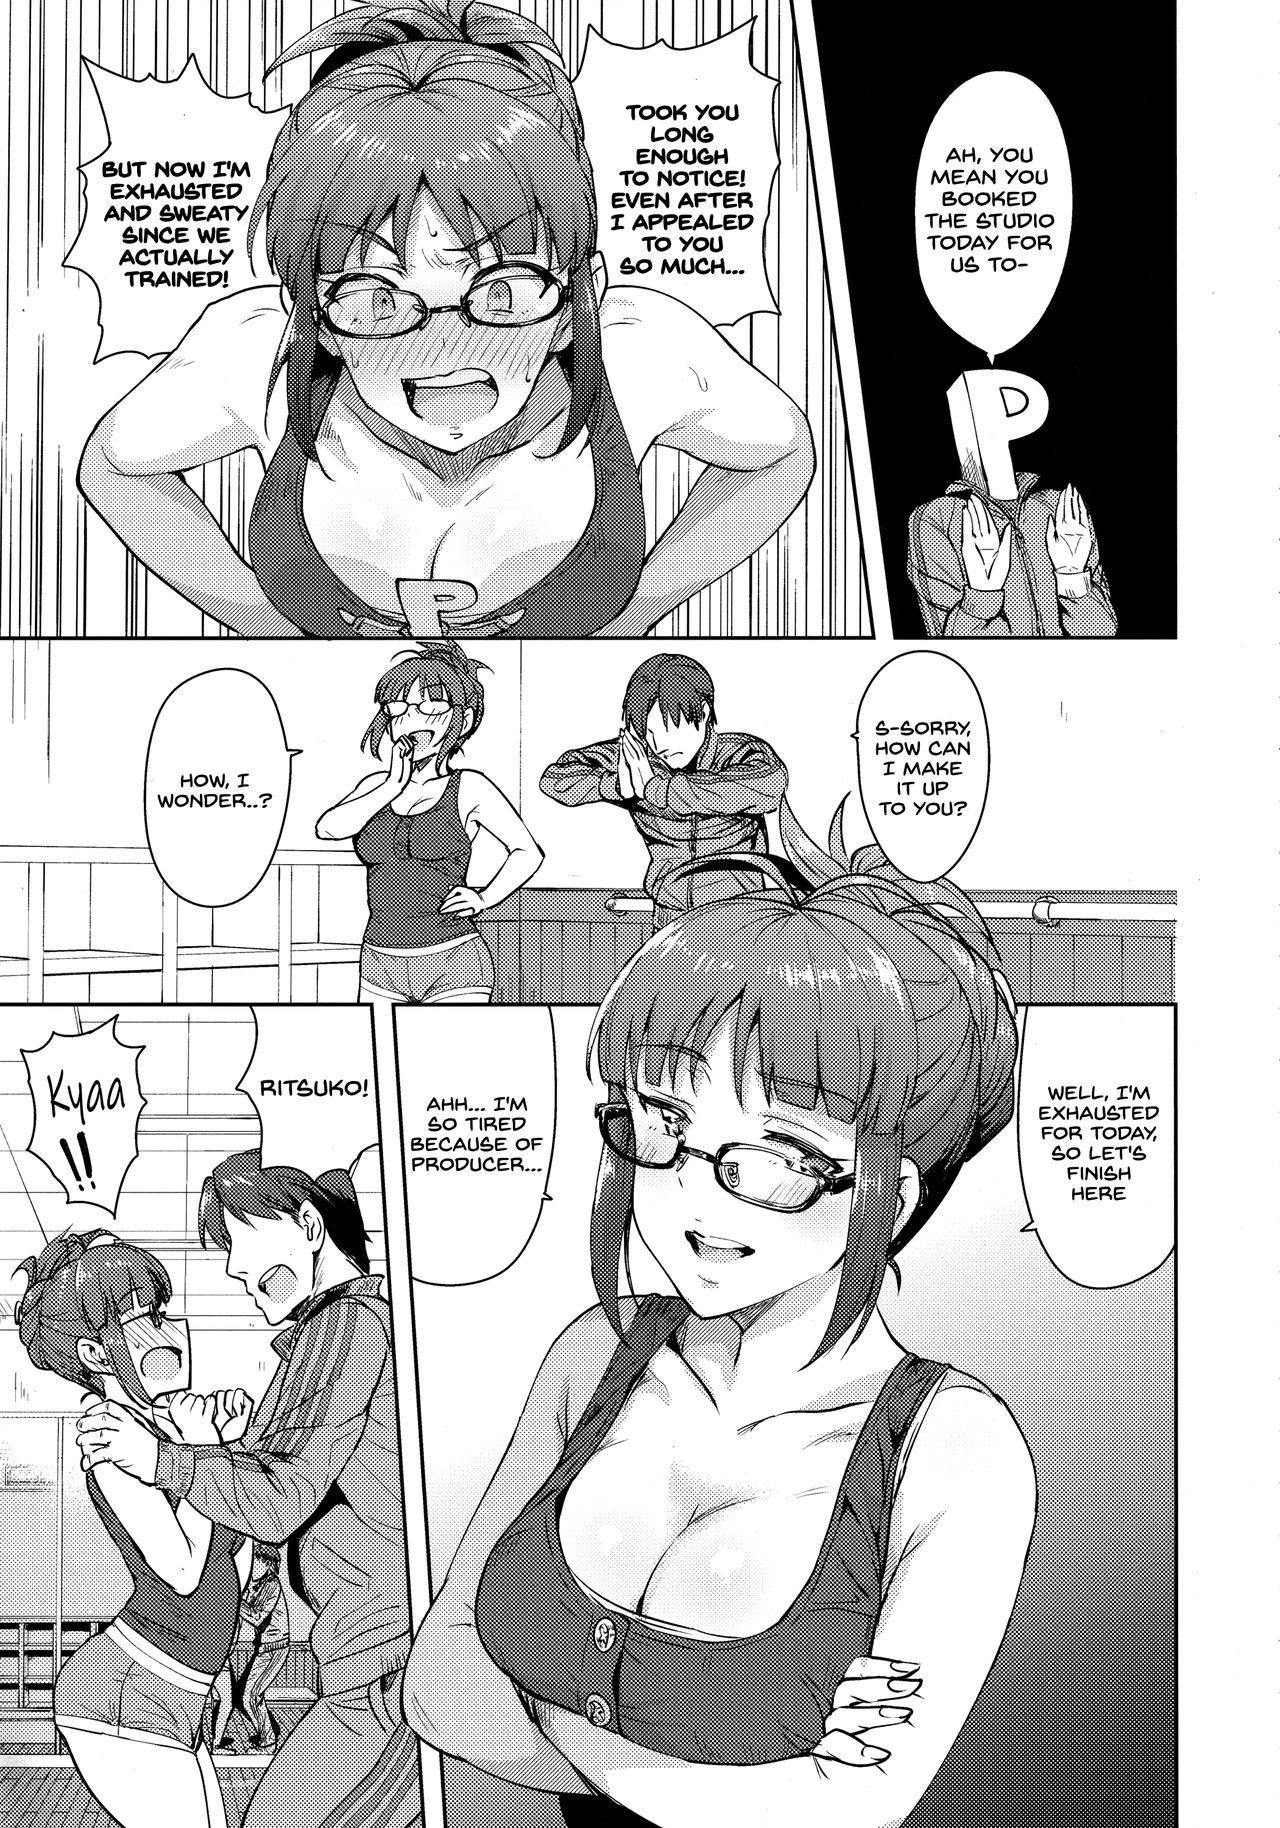 Boobs Ritsuko to Stretch! - The idolmaster Colombia - Page 4